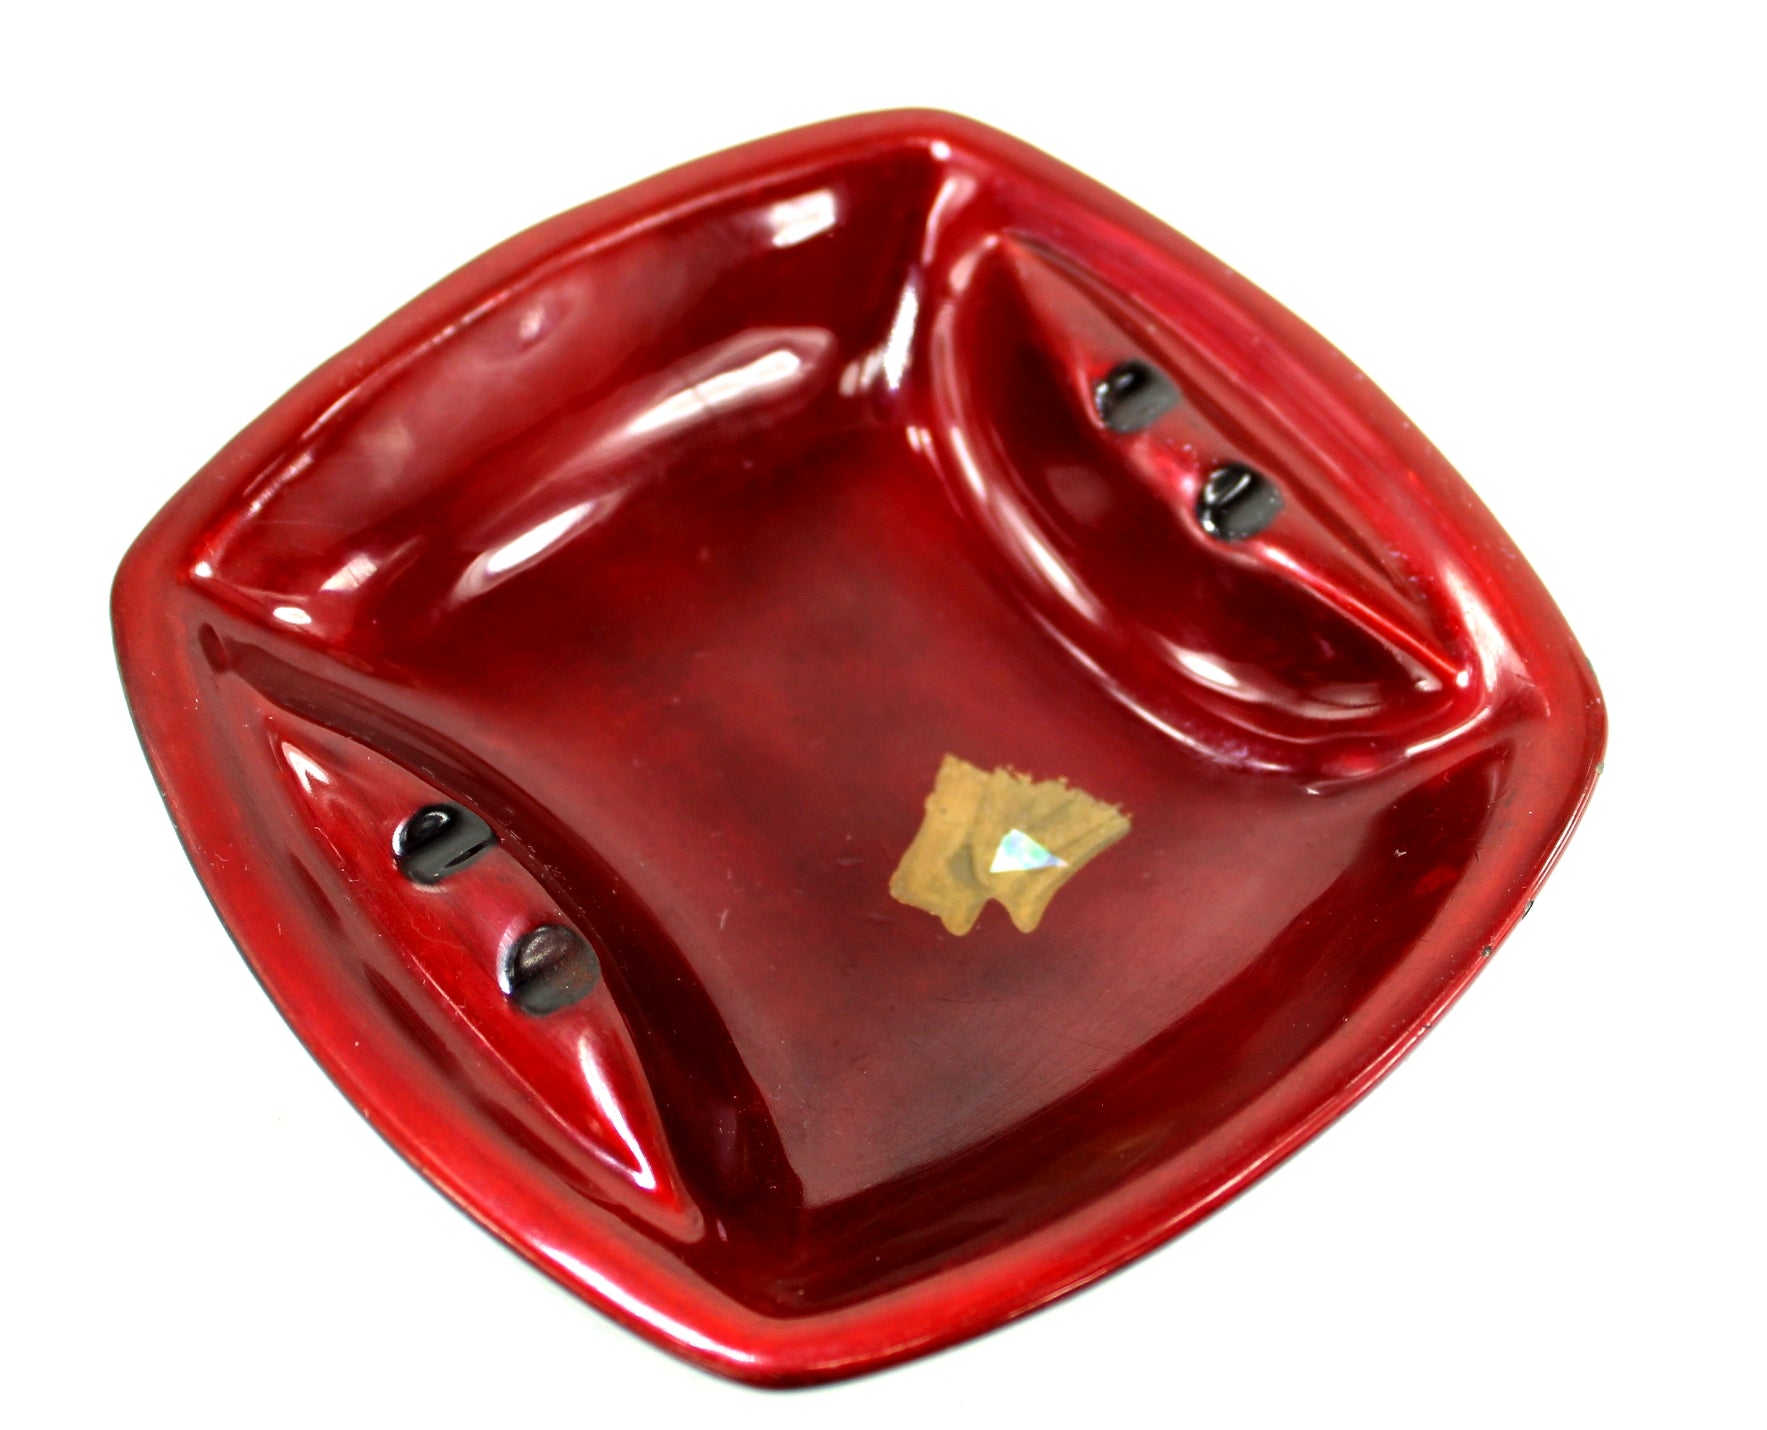 Black Glass Ashtray - Red Enamel Japan Mid Century Unusual Wood Shell Inserts colorful shell  insert